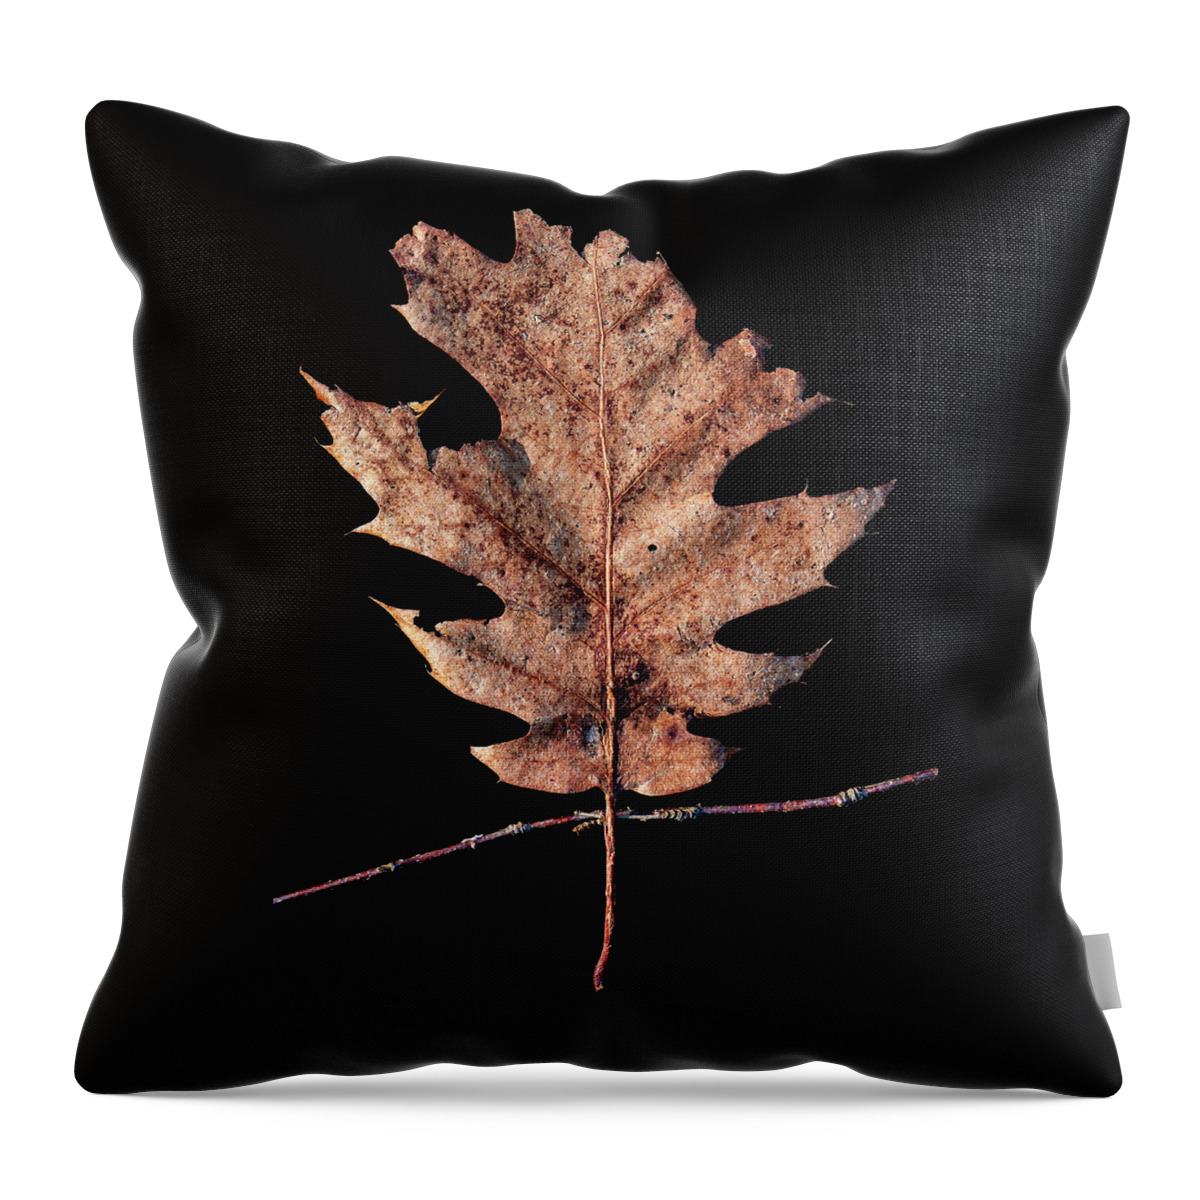 Leaves Throw Pillow featuring the photograph Leaf 22 by David J Bookbinder